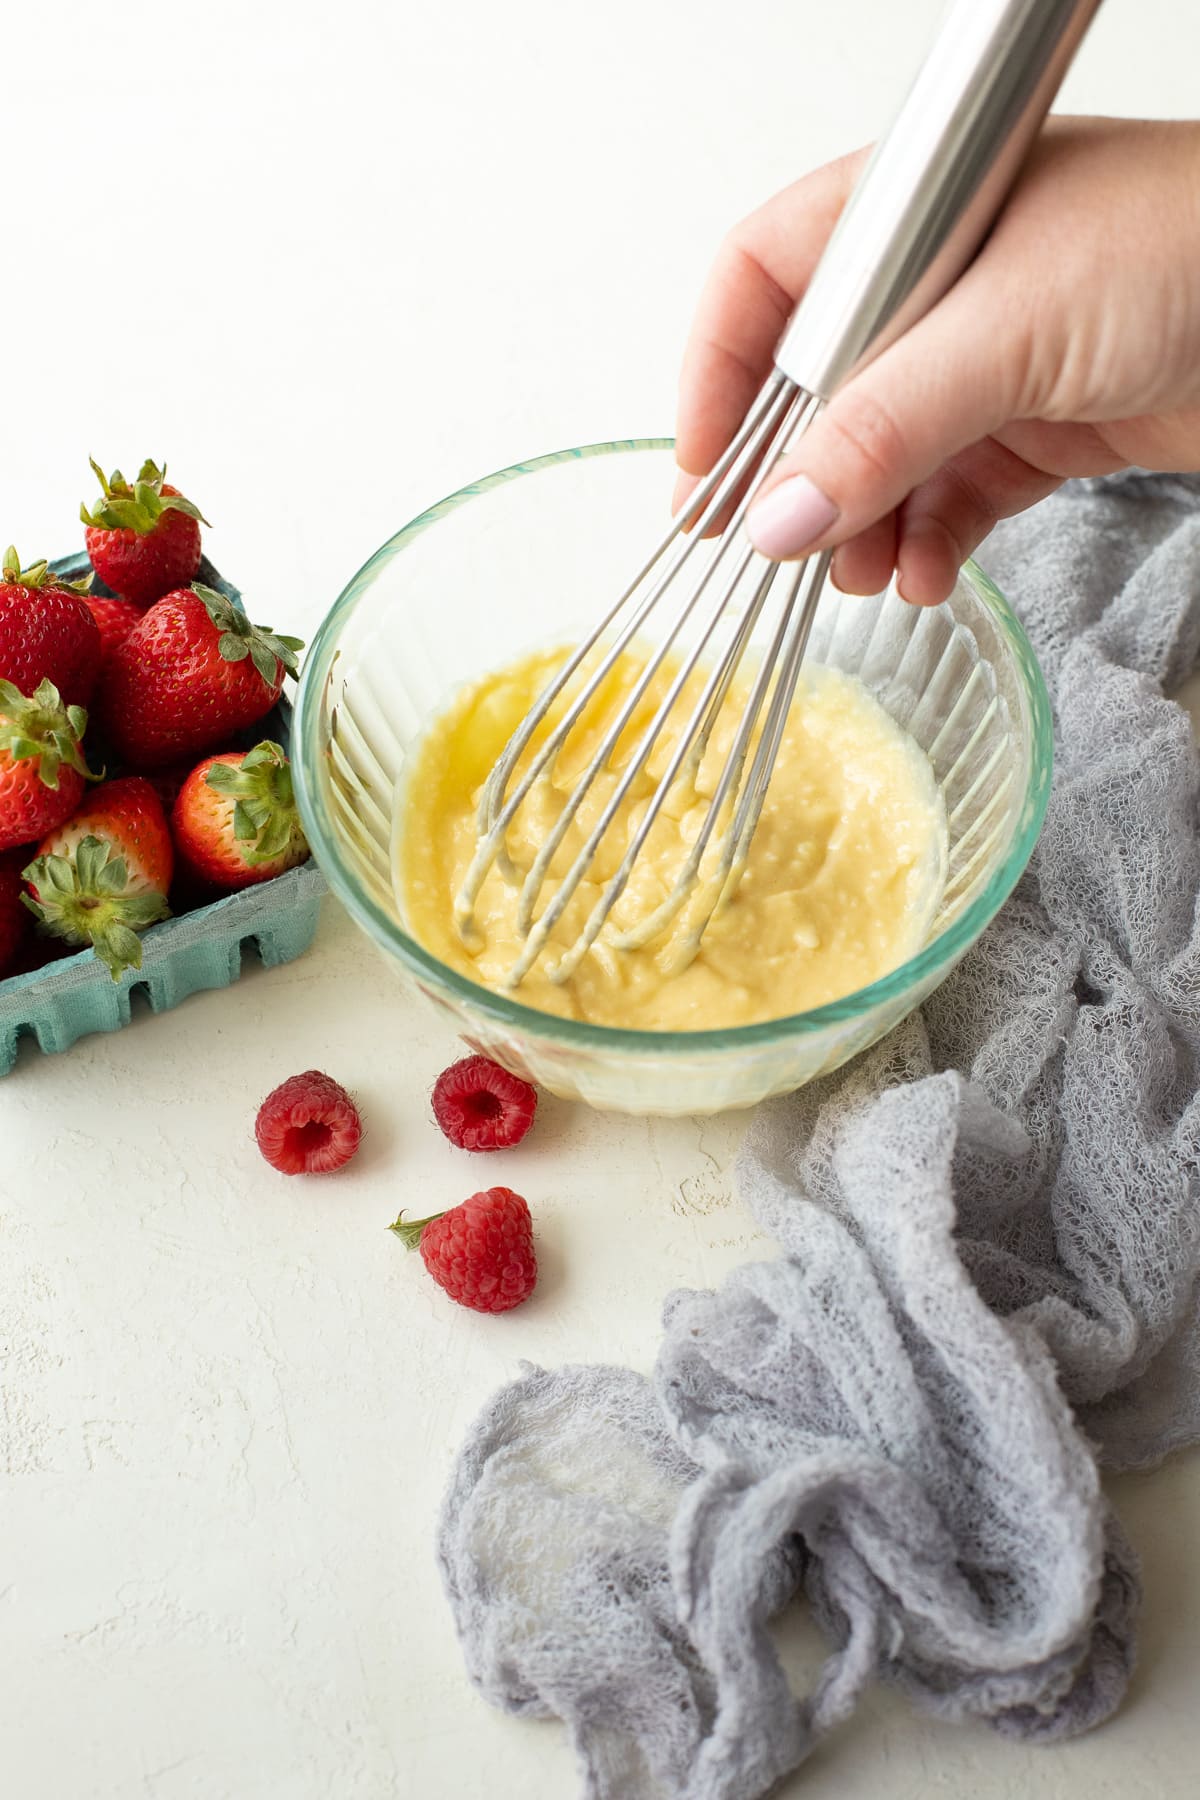 Cream cheese filling being whisked together in a small bowl, with berries in the background.